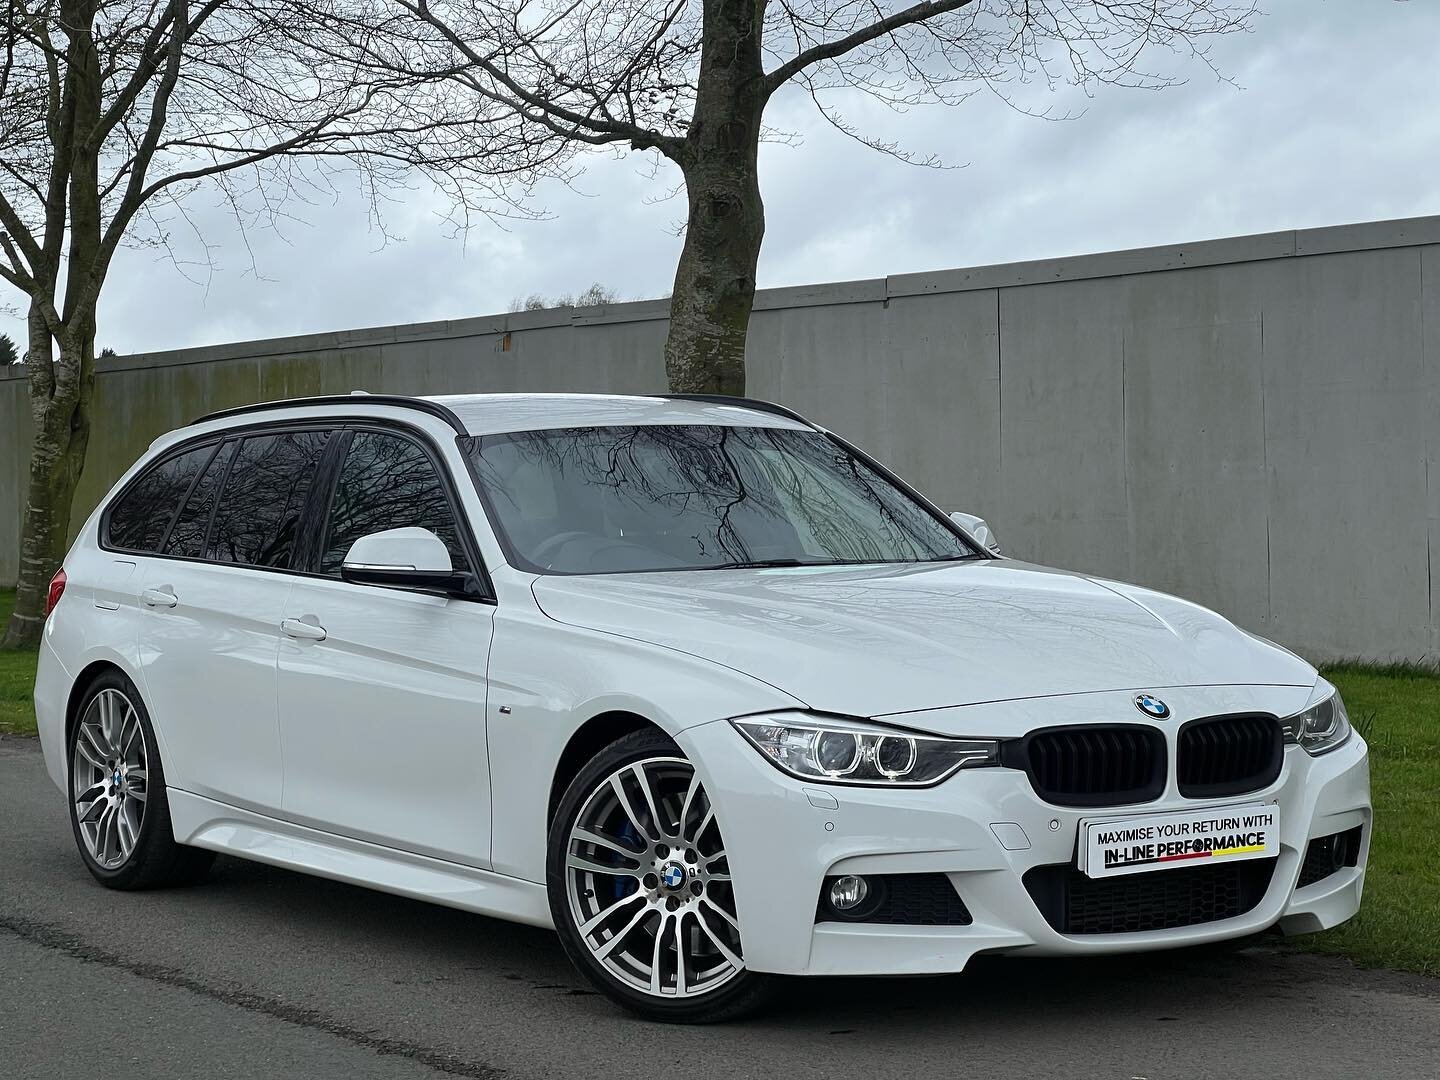 Here At IN-LINE PERFORMANCE We Take Pride And Joy Into Supplying You With Great Quality Of German  Engineering. We Are Proud To Present To You This 2014 BMW 330D Touring  Finished In A Desirable Alpine White With Black Dokota Leather Interior.
We hav